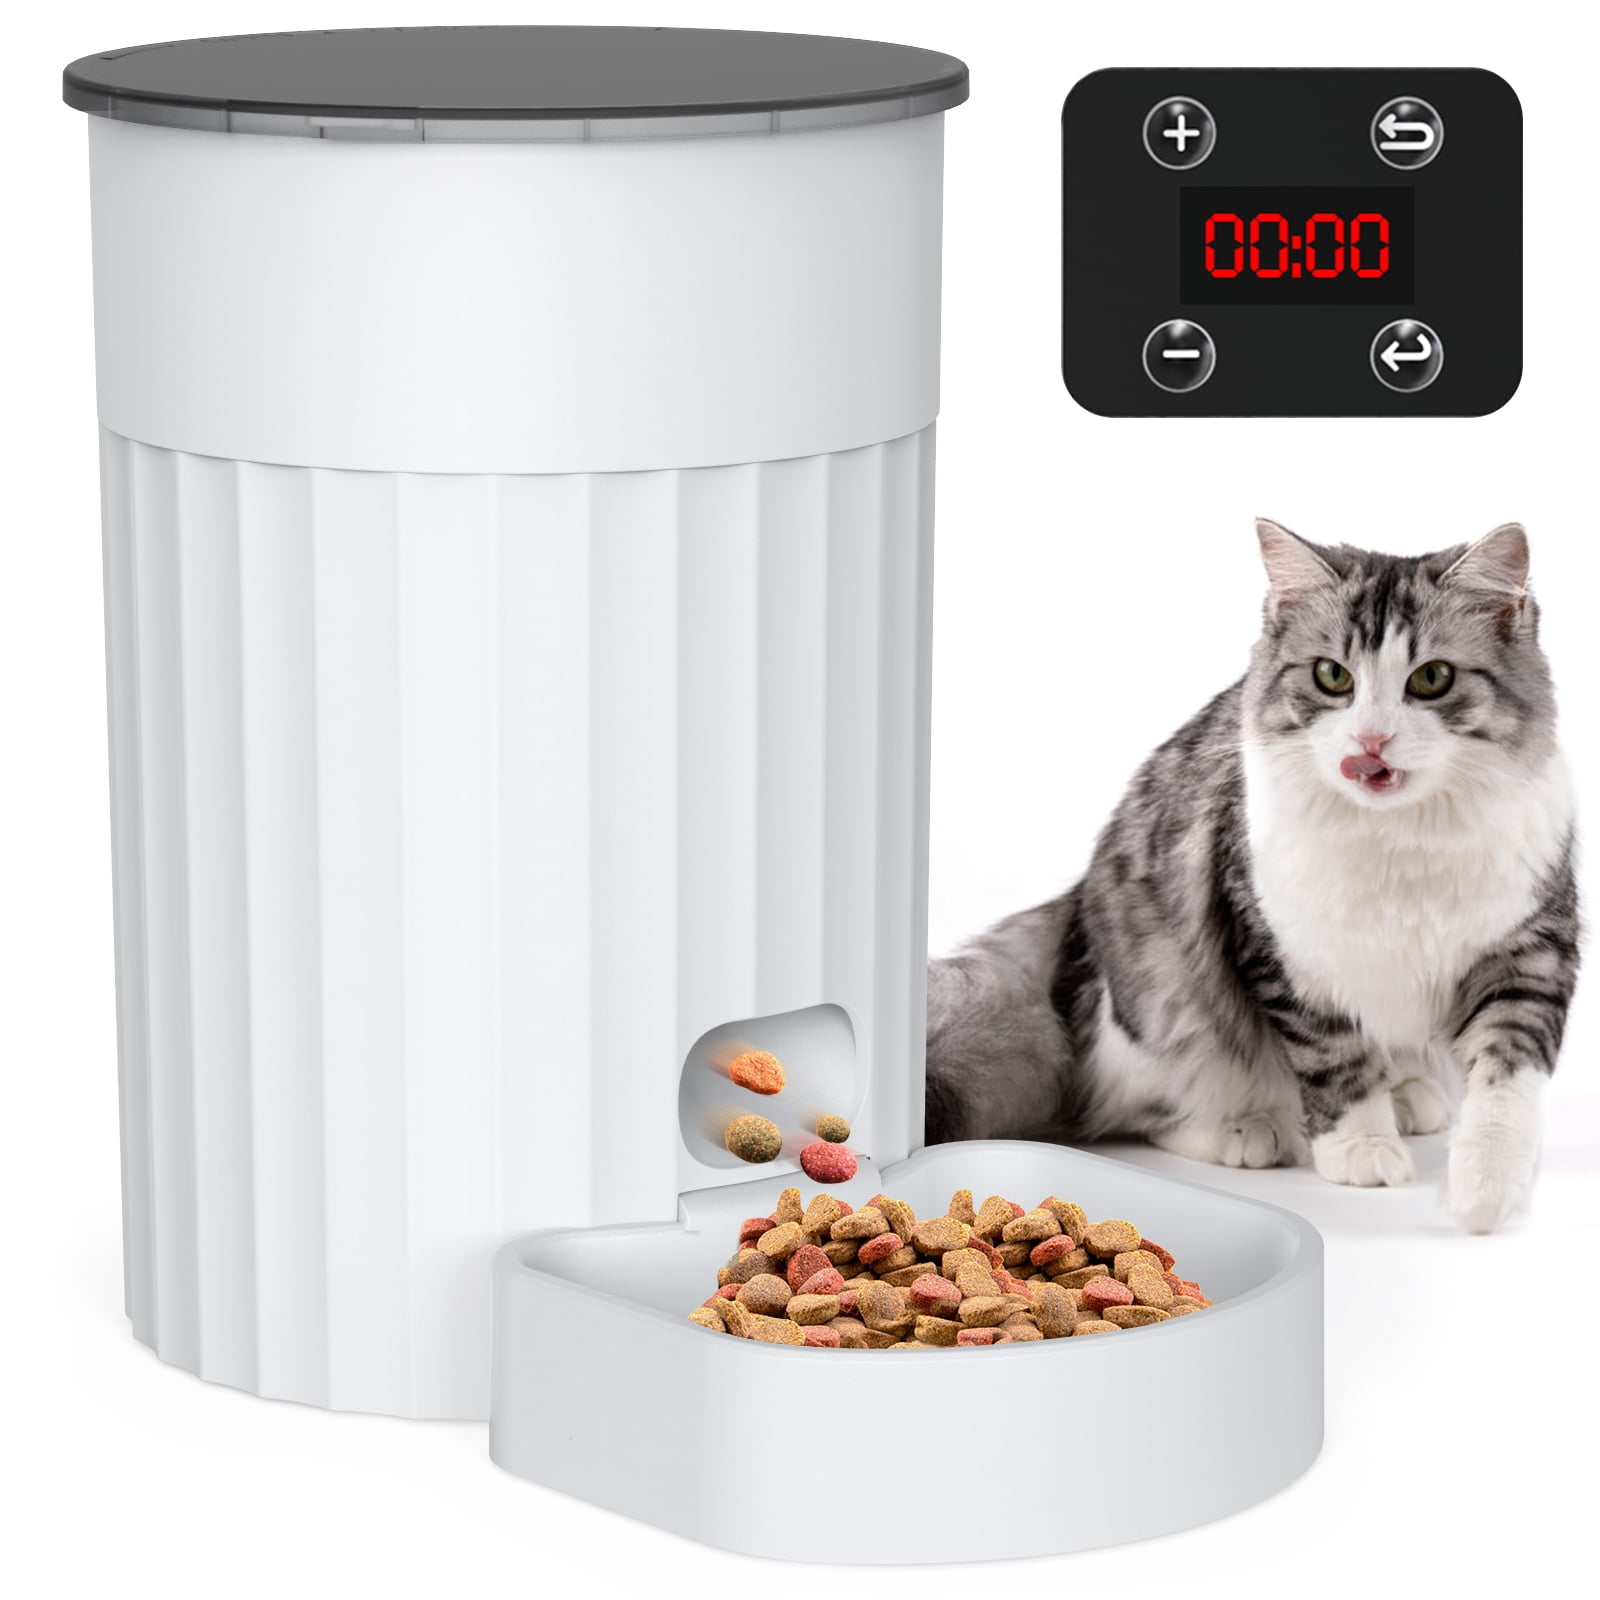 Automatic Pet Food Dispenser 3L Pet Feeder Food Bowl Programmable Timer Up To 4 Meals 2 Power Supply - Walmart.com